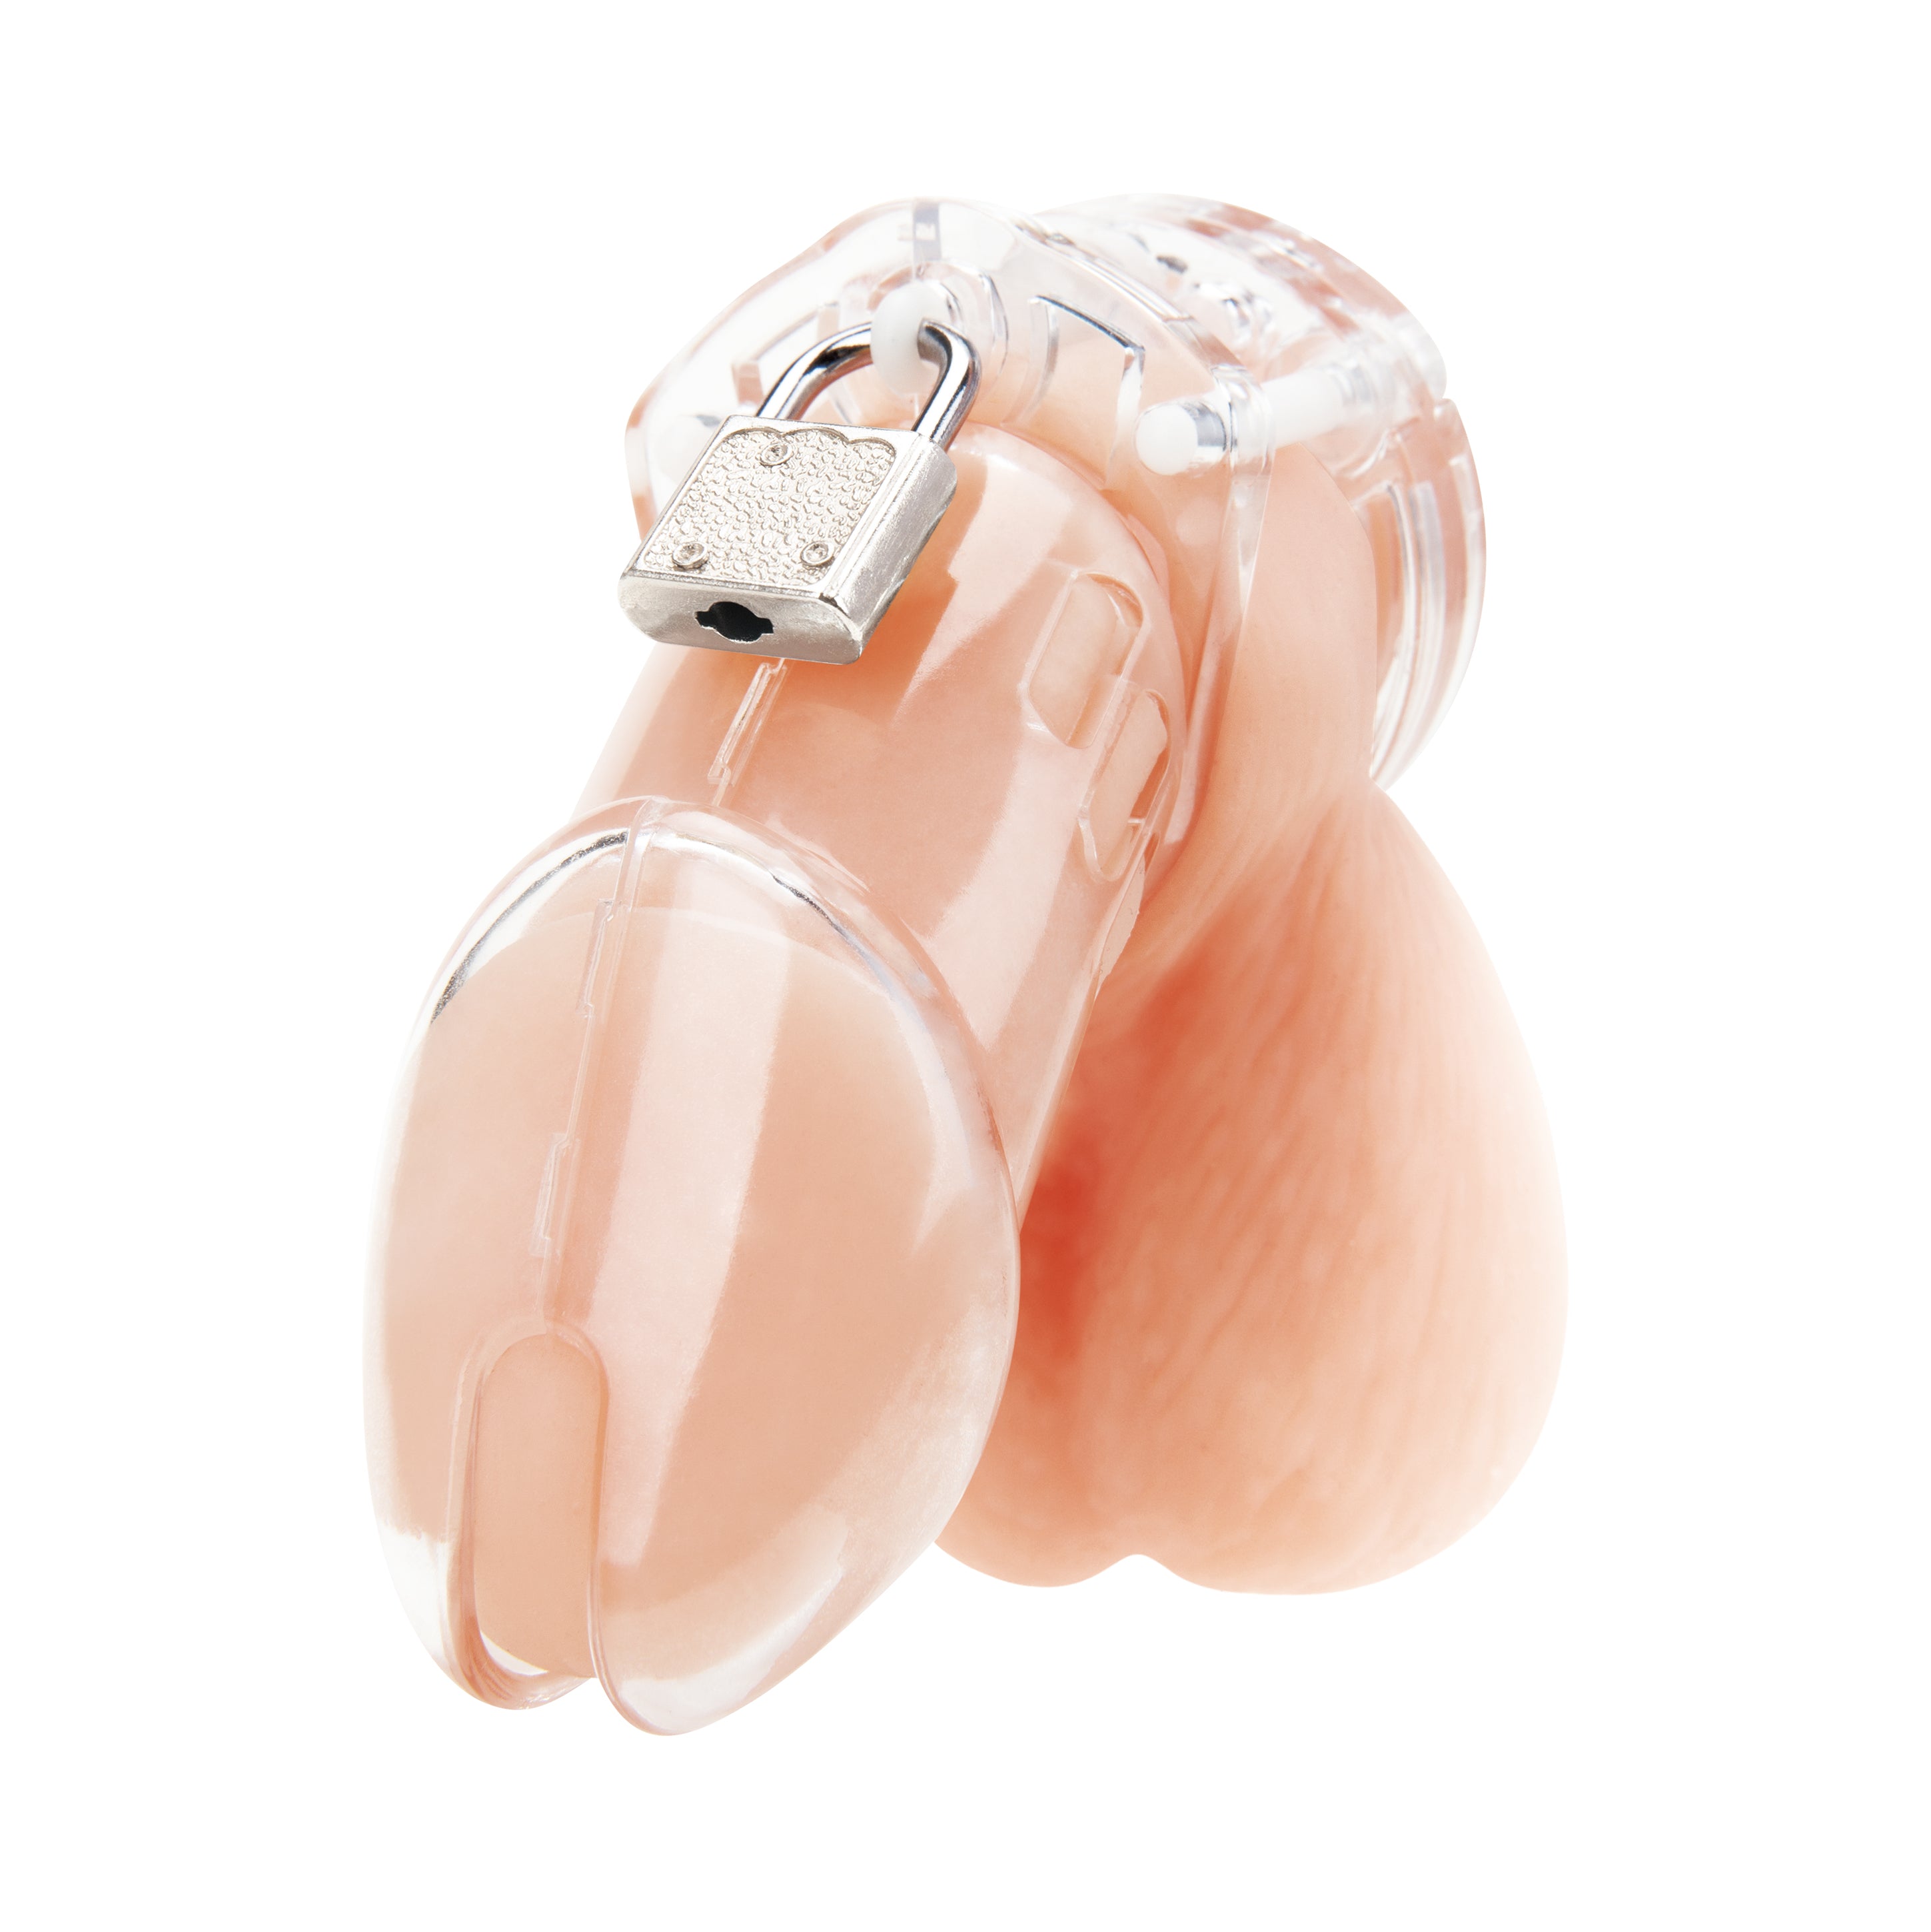 Acrylic See-thru Chastity Cock Cage with Lock